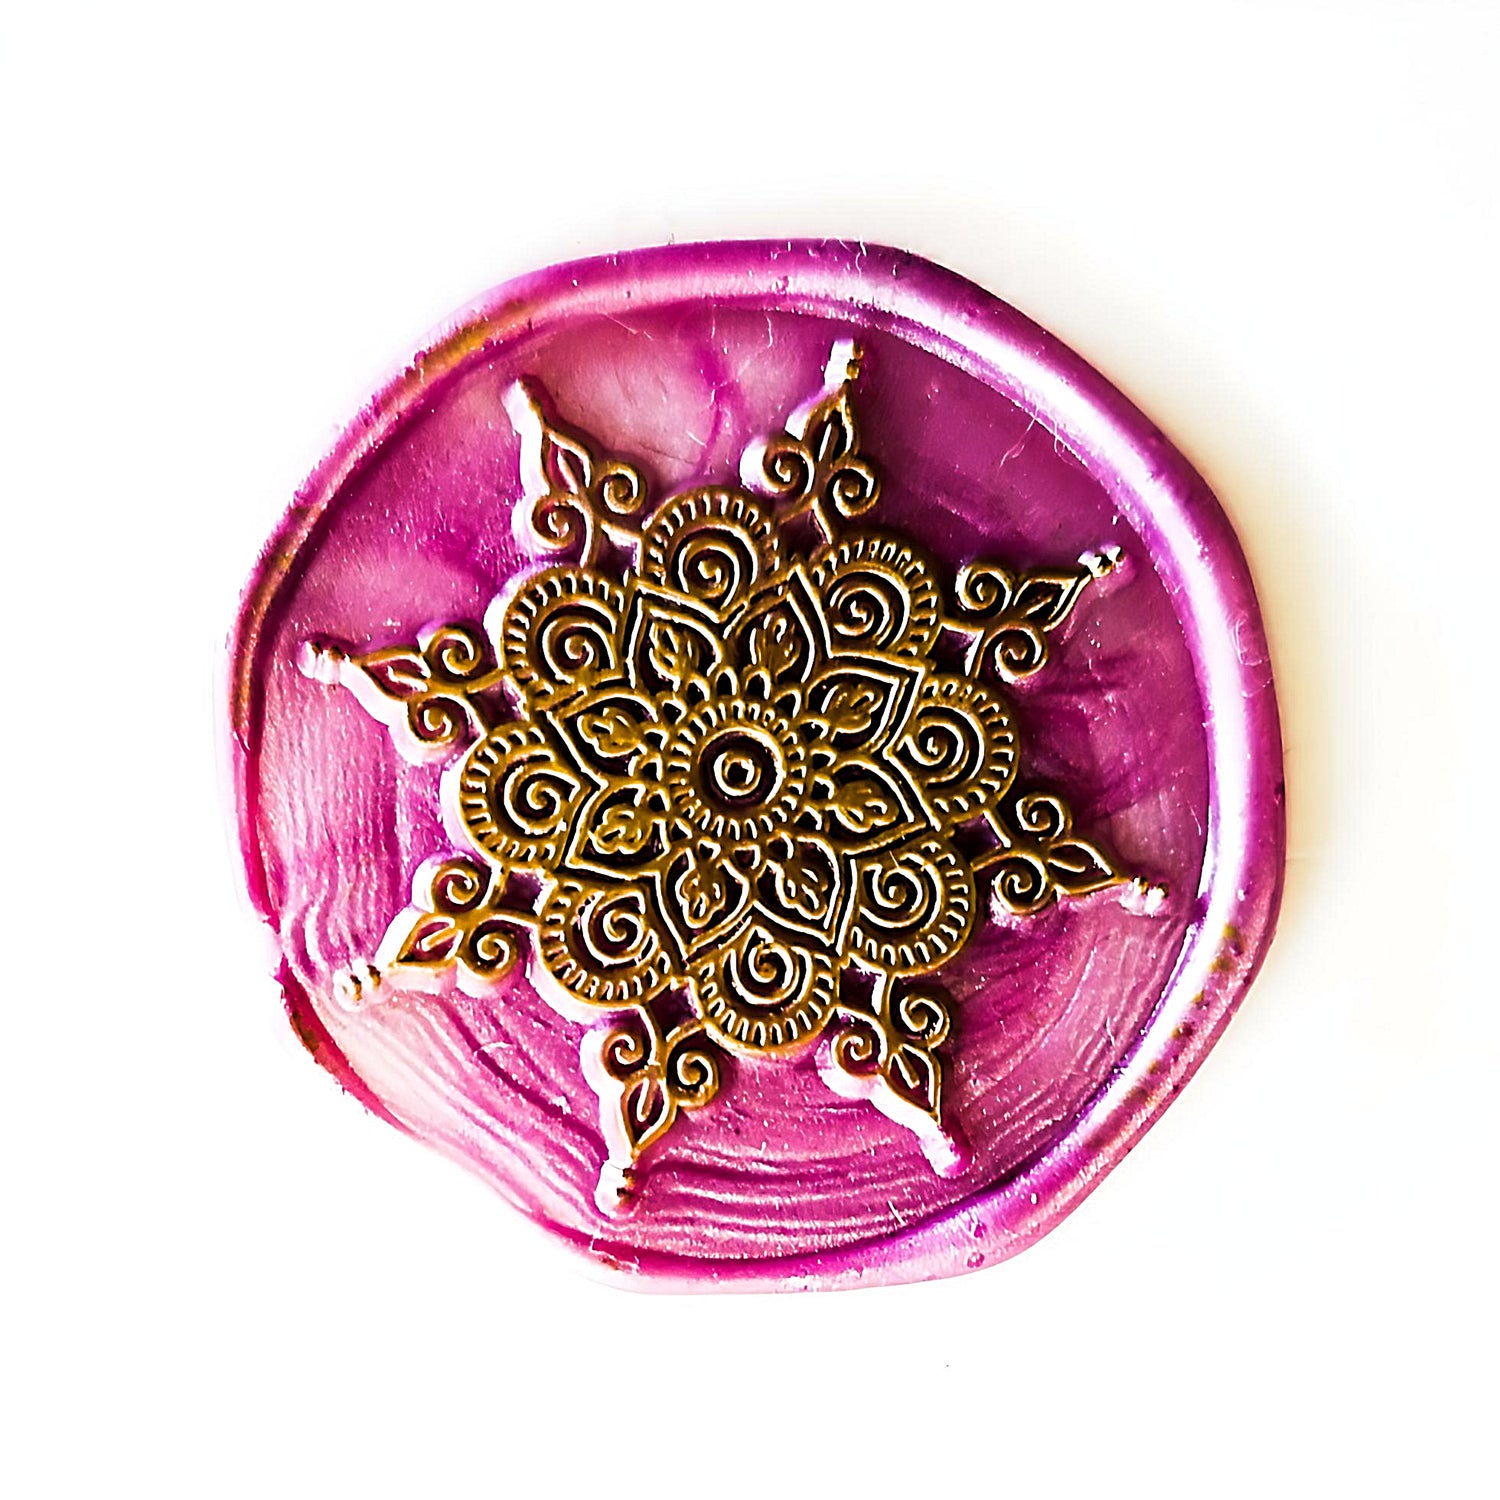 a round wax stamp in pink and gold colors